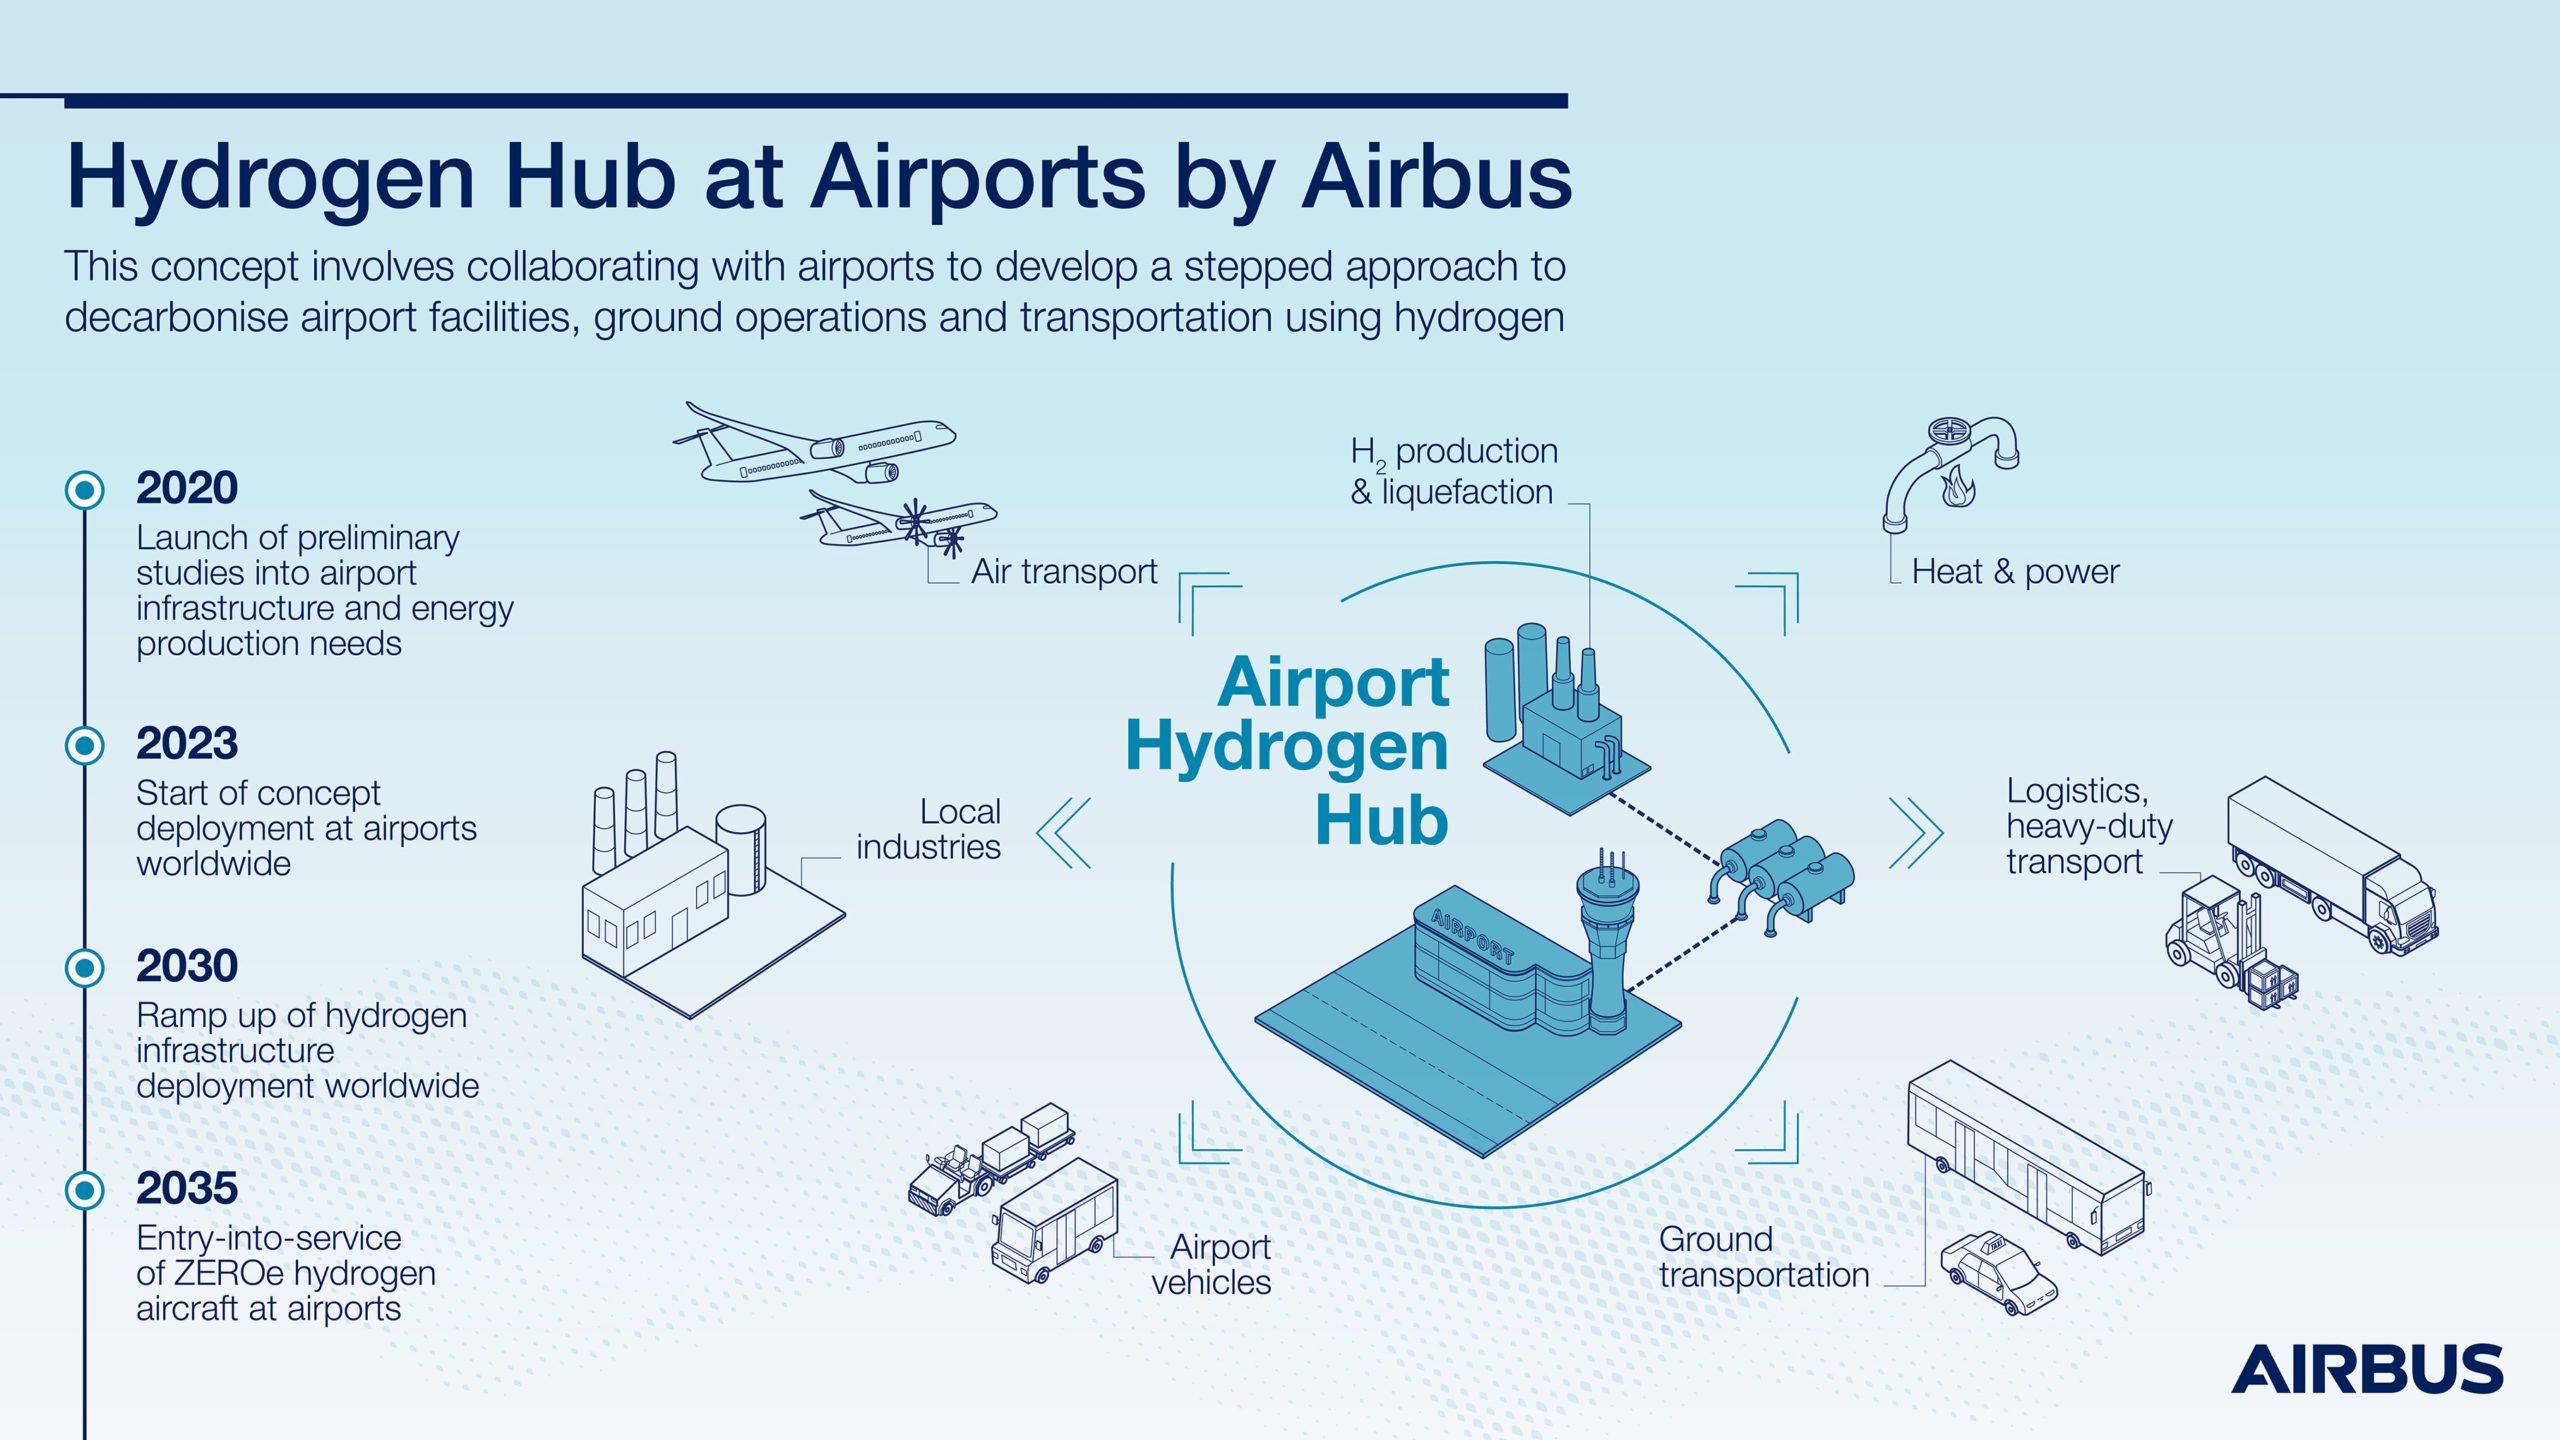 Hydrogen Hub At Airports by Airbus